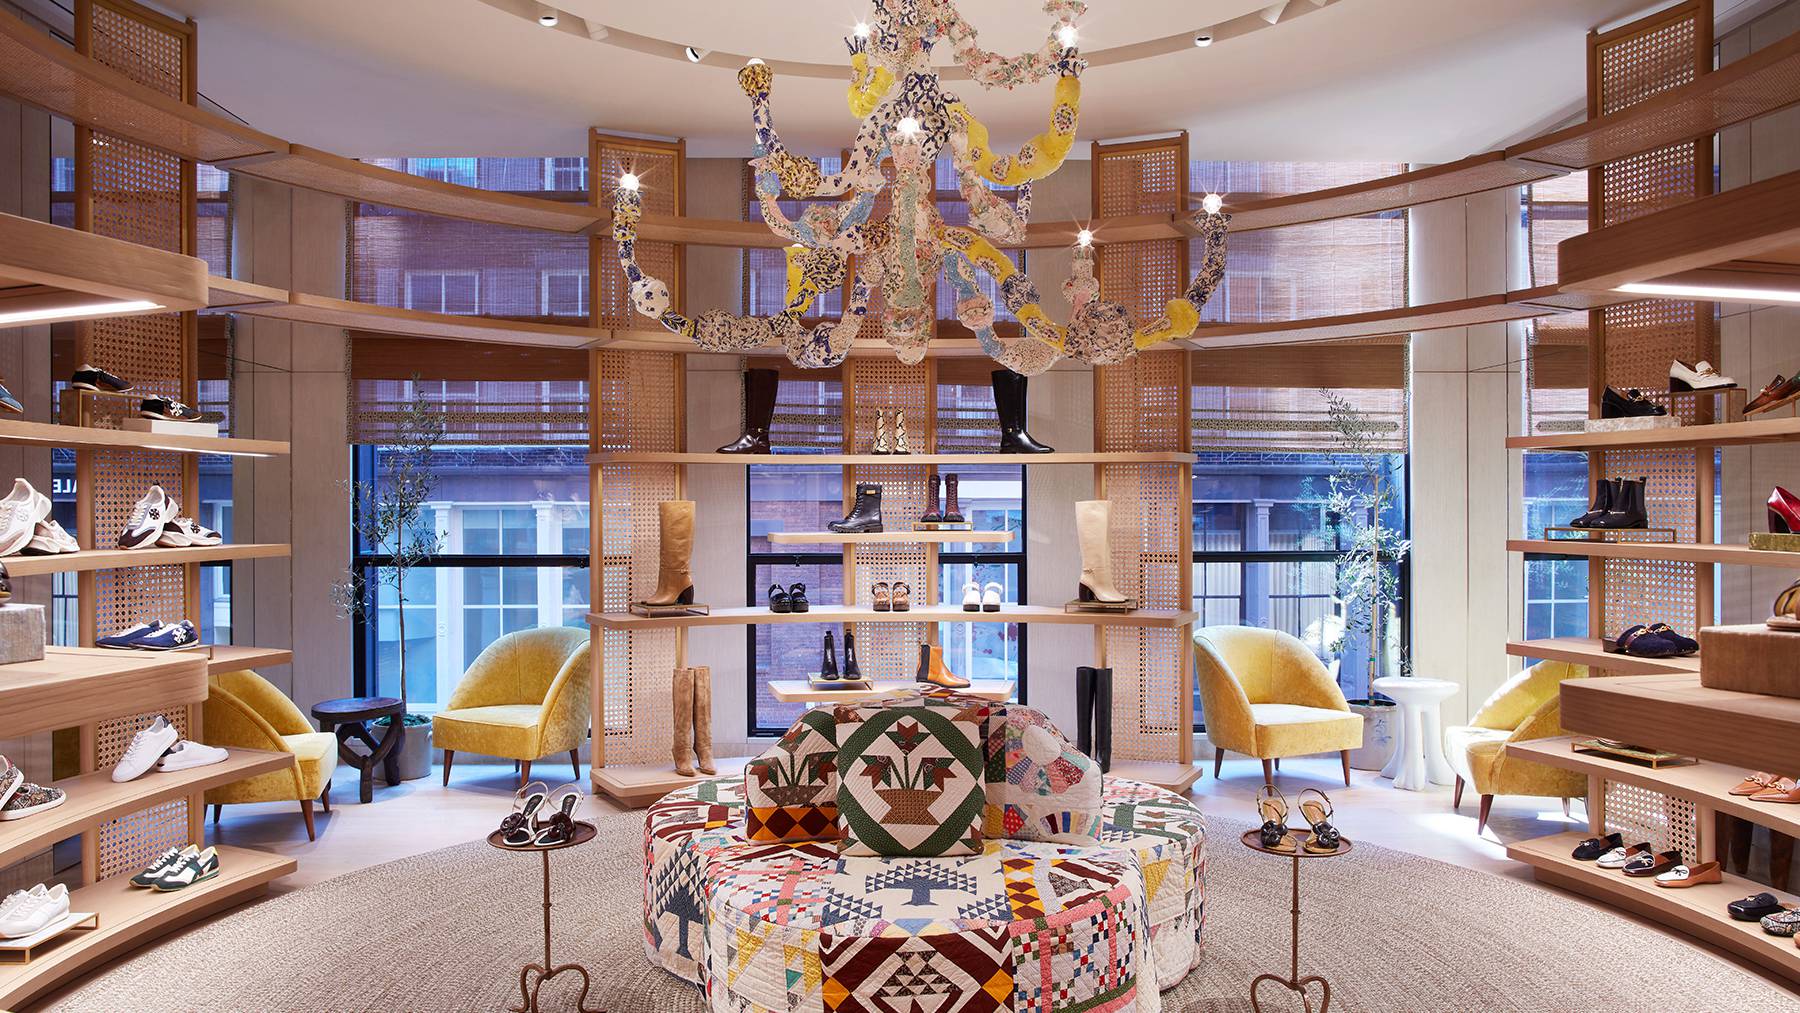 The new Tory Burch store in Soho has been designed to feel like an extravagantly decorated home. Tory Burch.